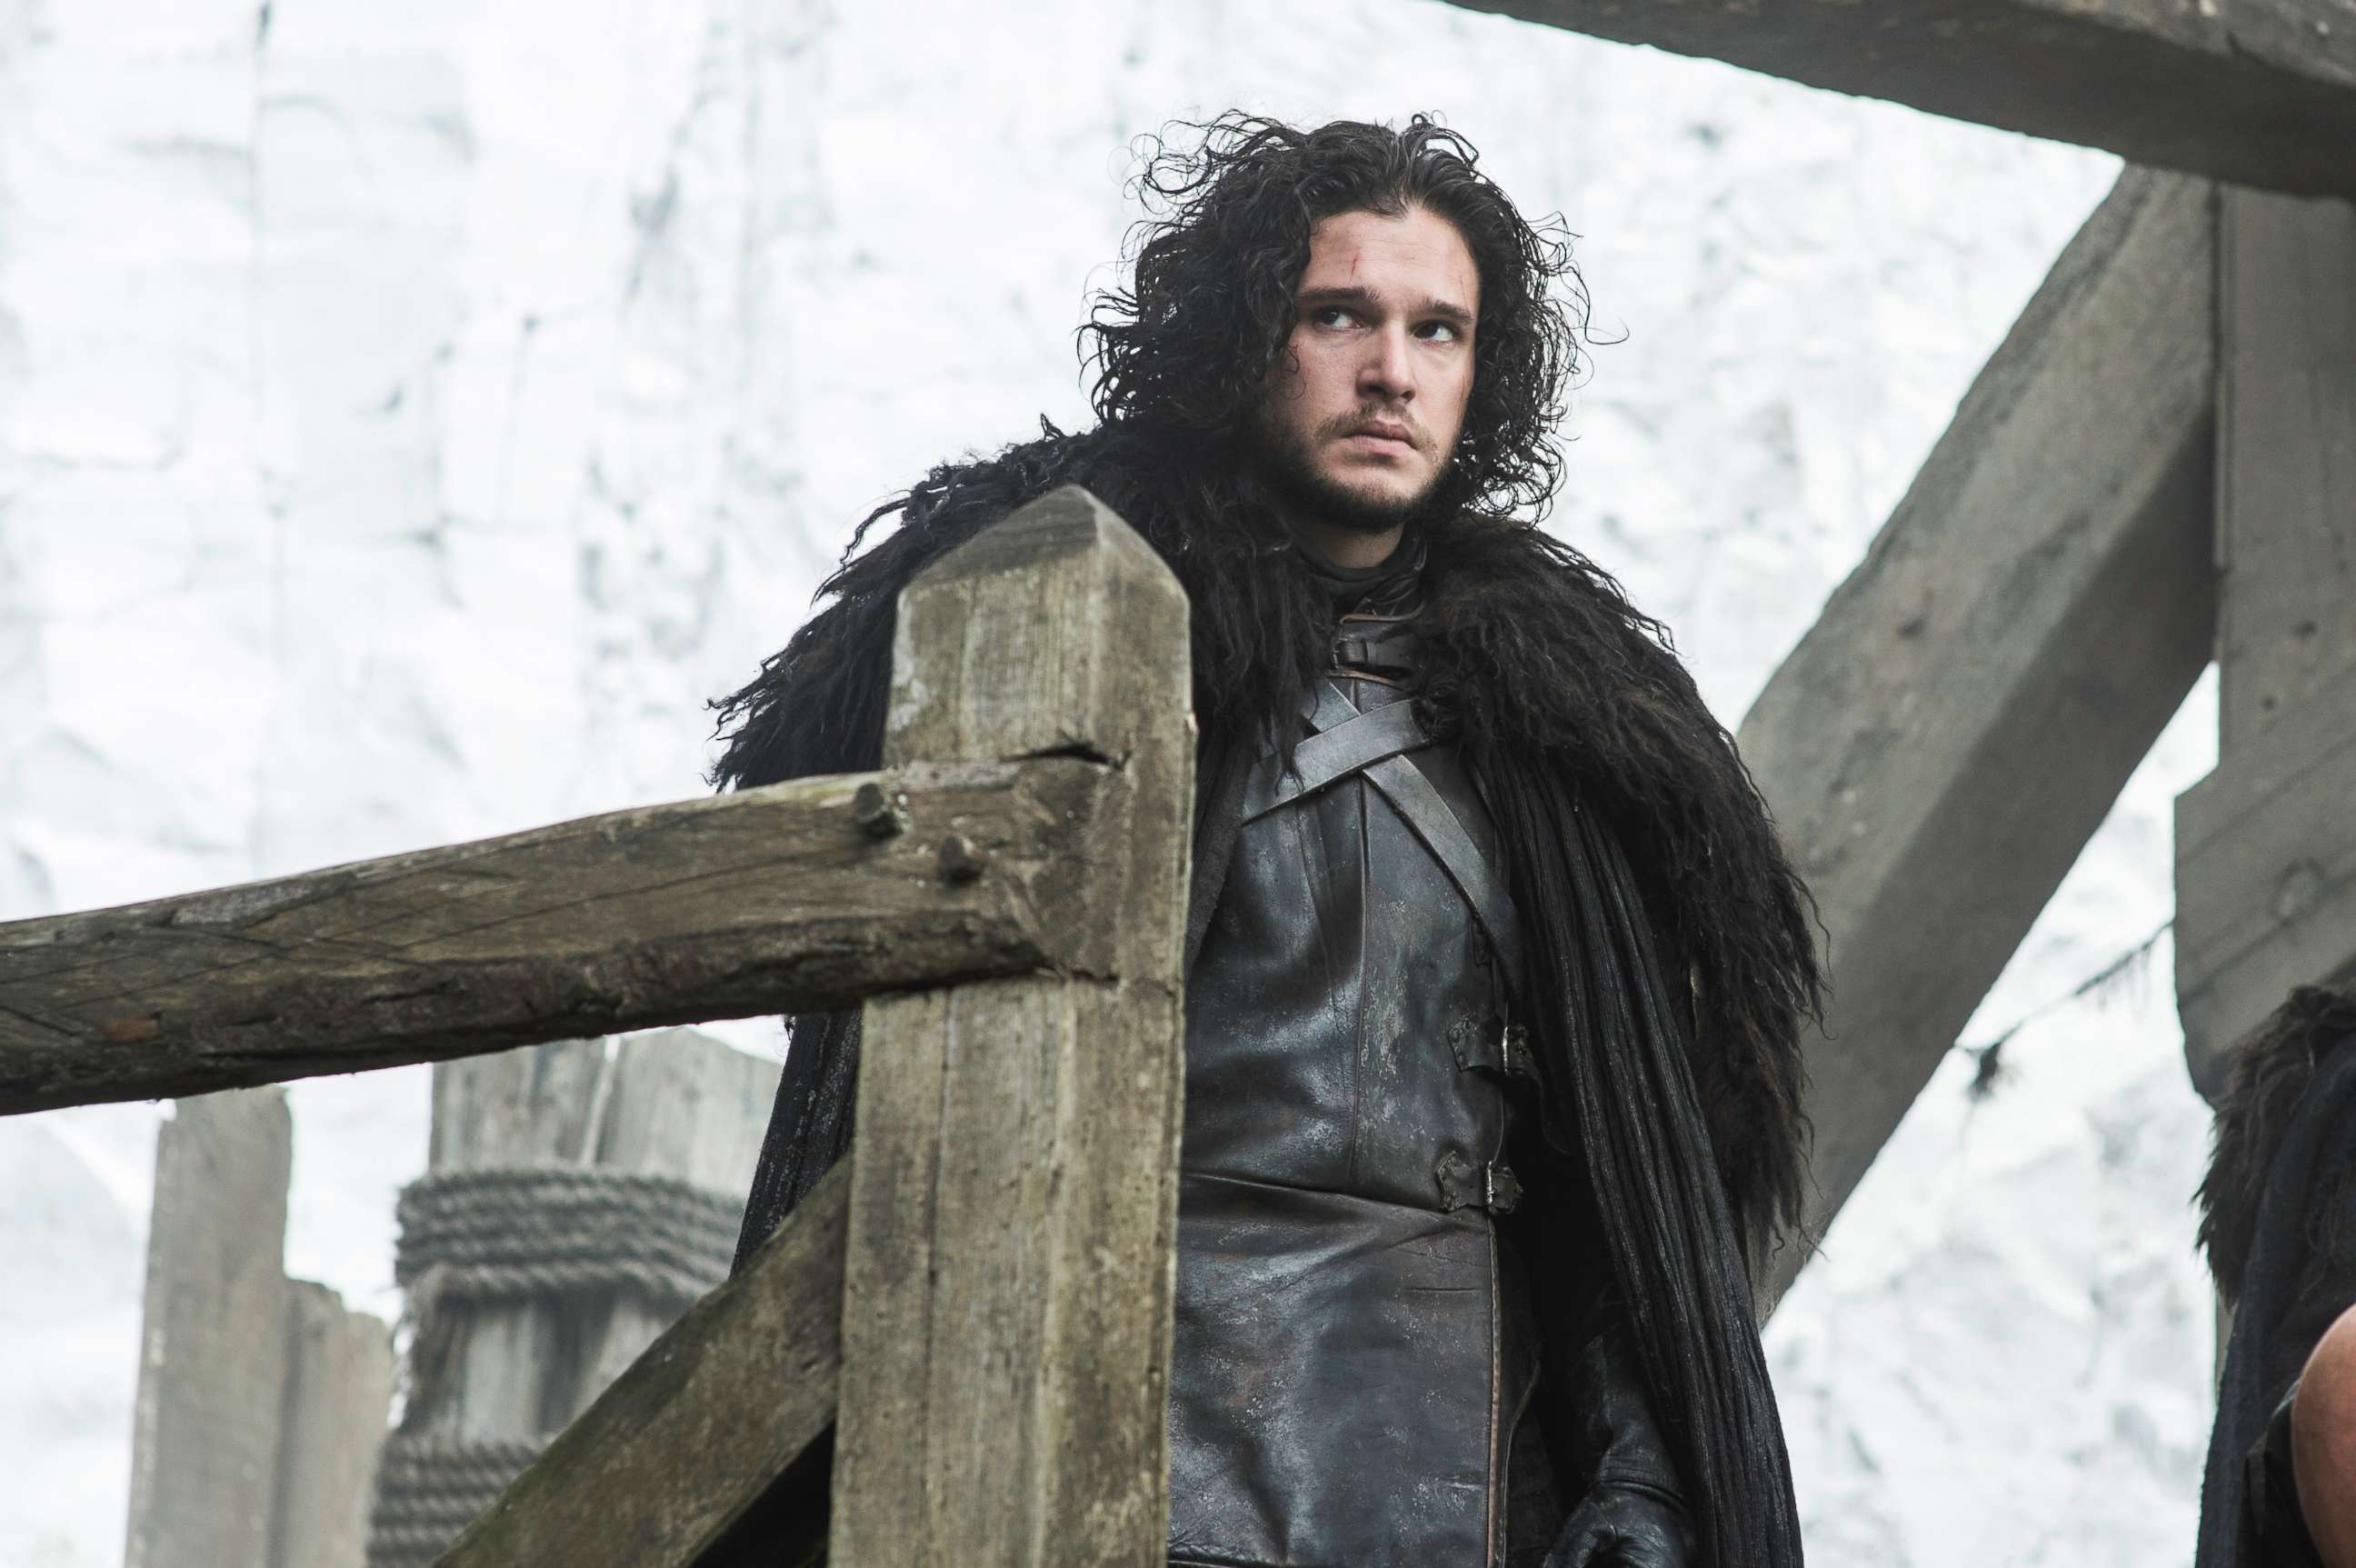 PHOTO: Jon Snow plays the role of Kit Harington on HBO's "Game of Thrones."